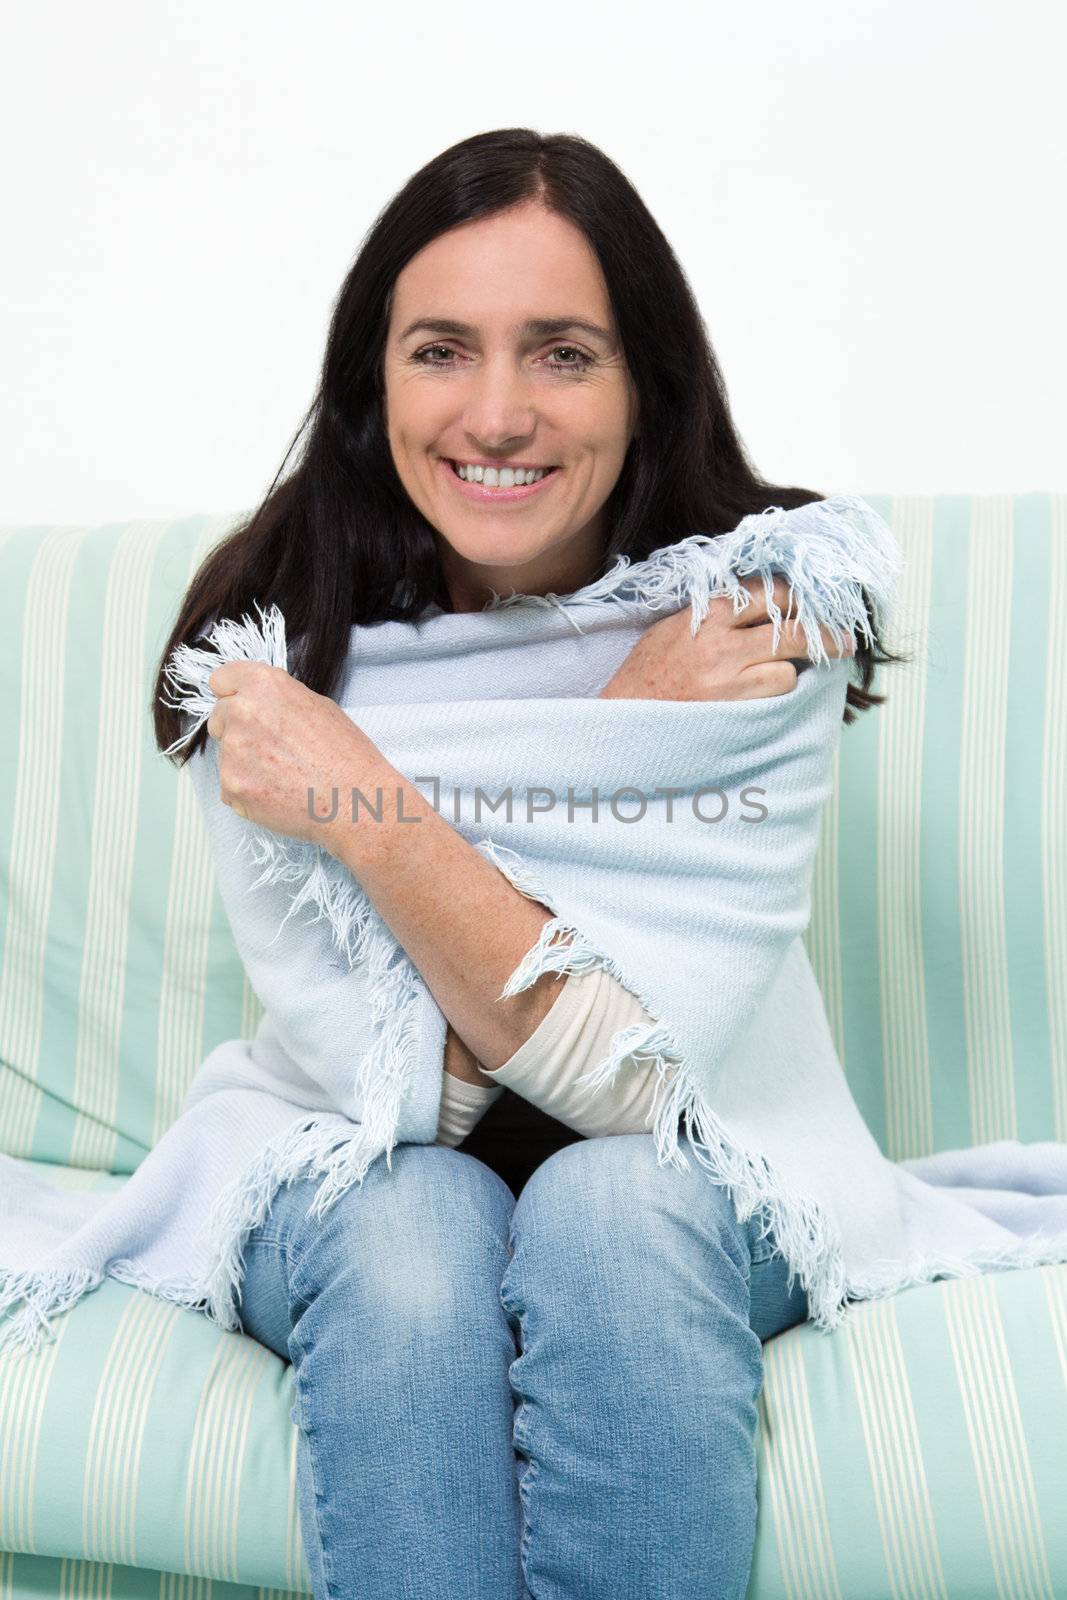 Black haired woman with a blanket sitting on a couch